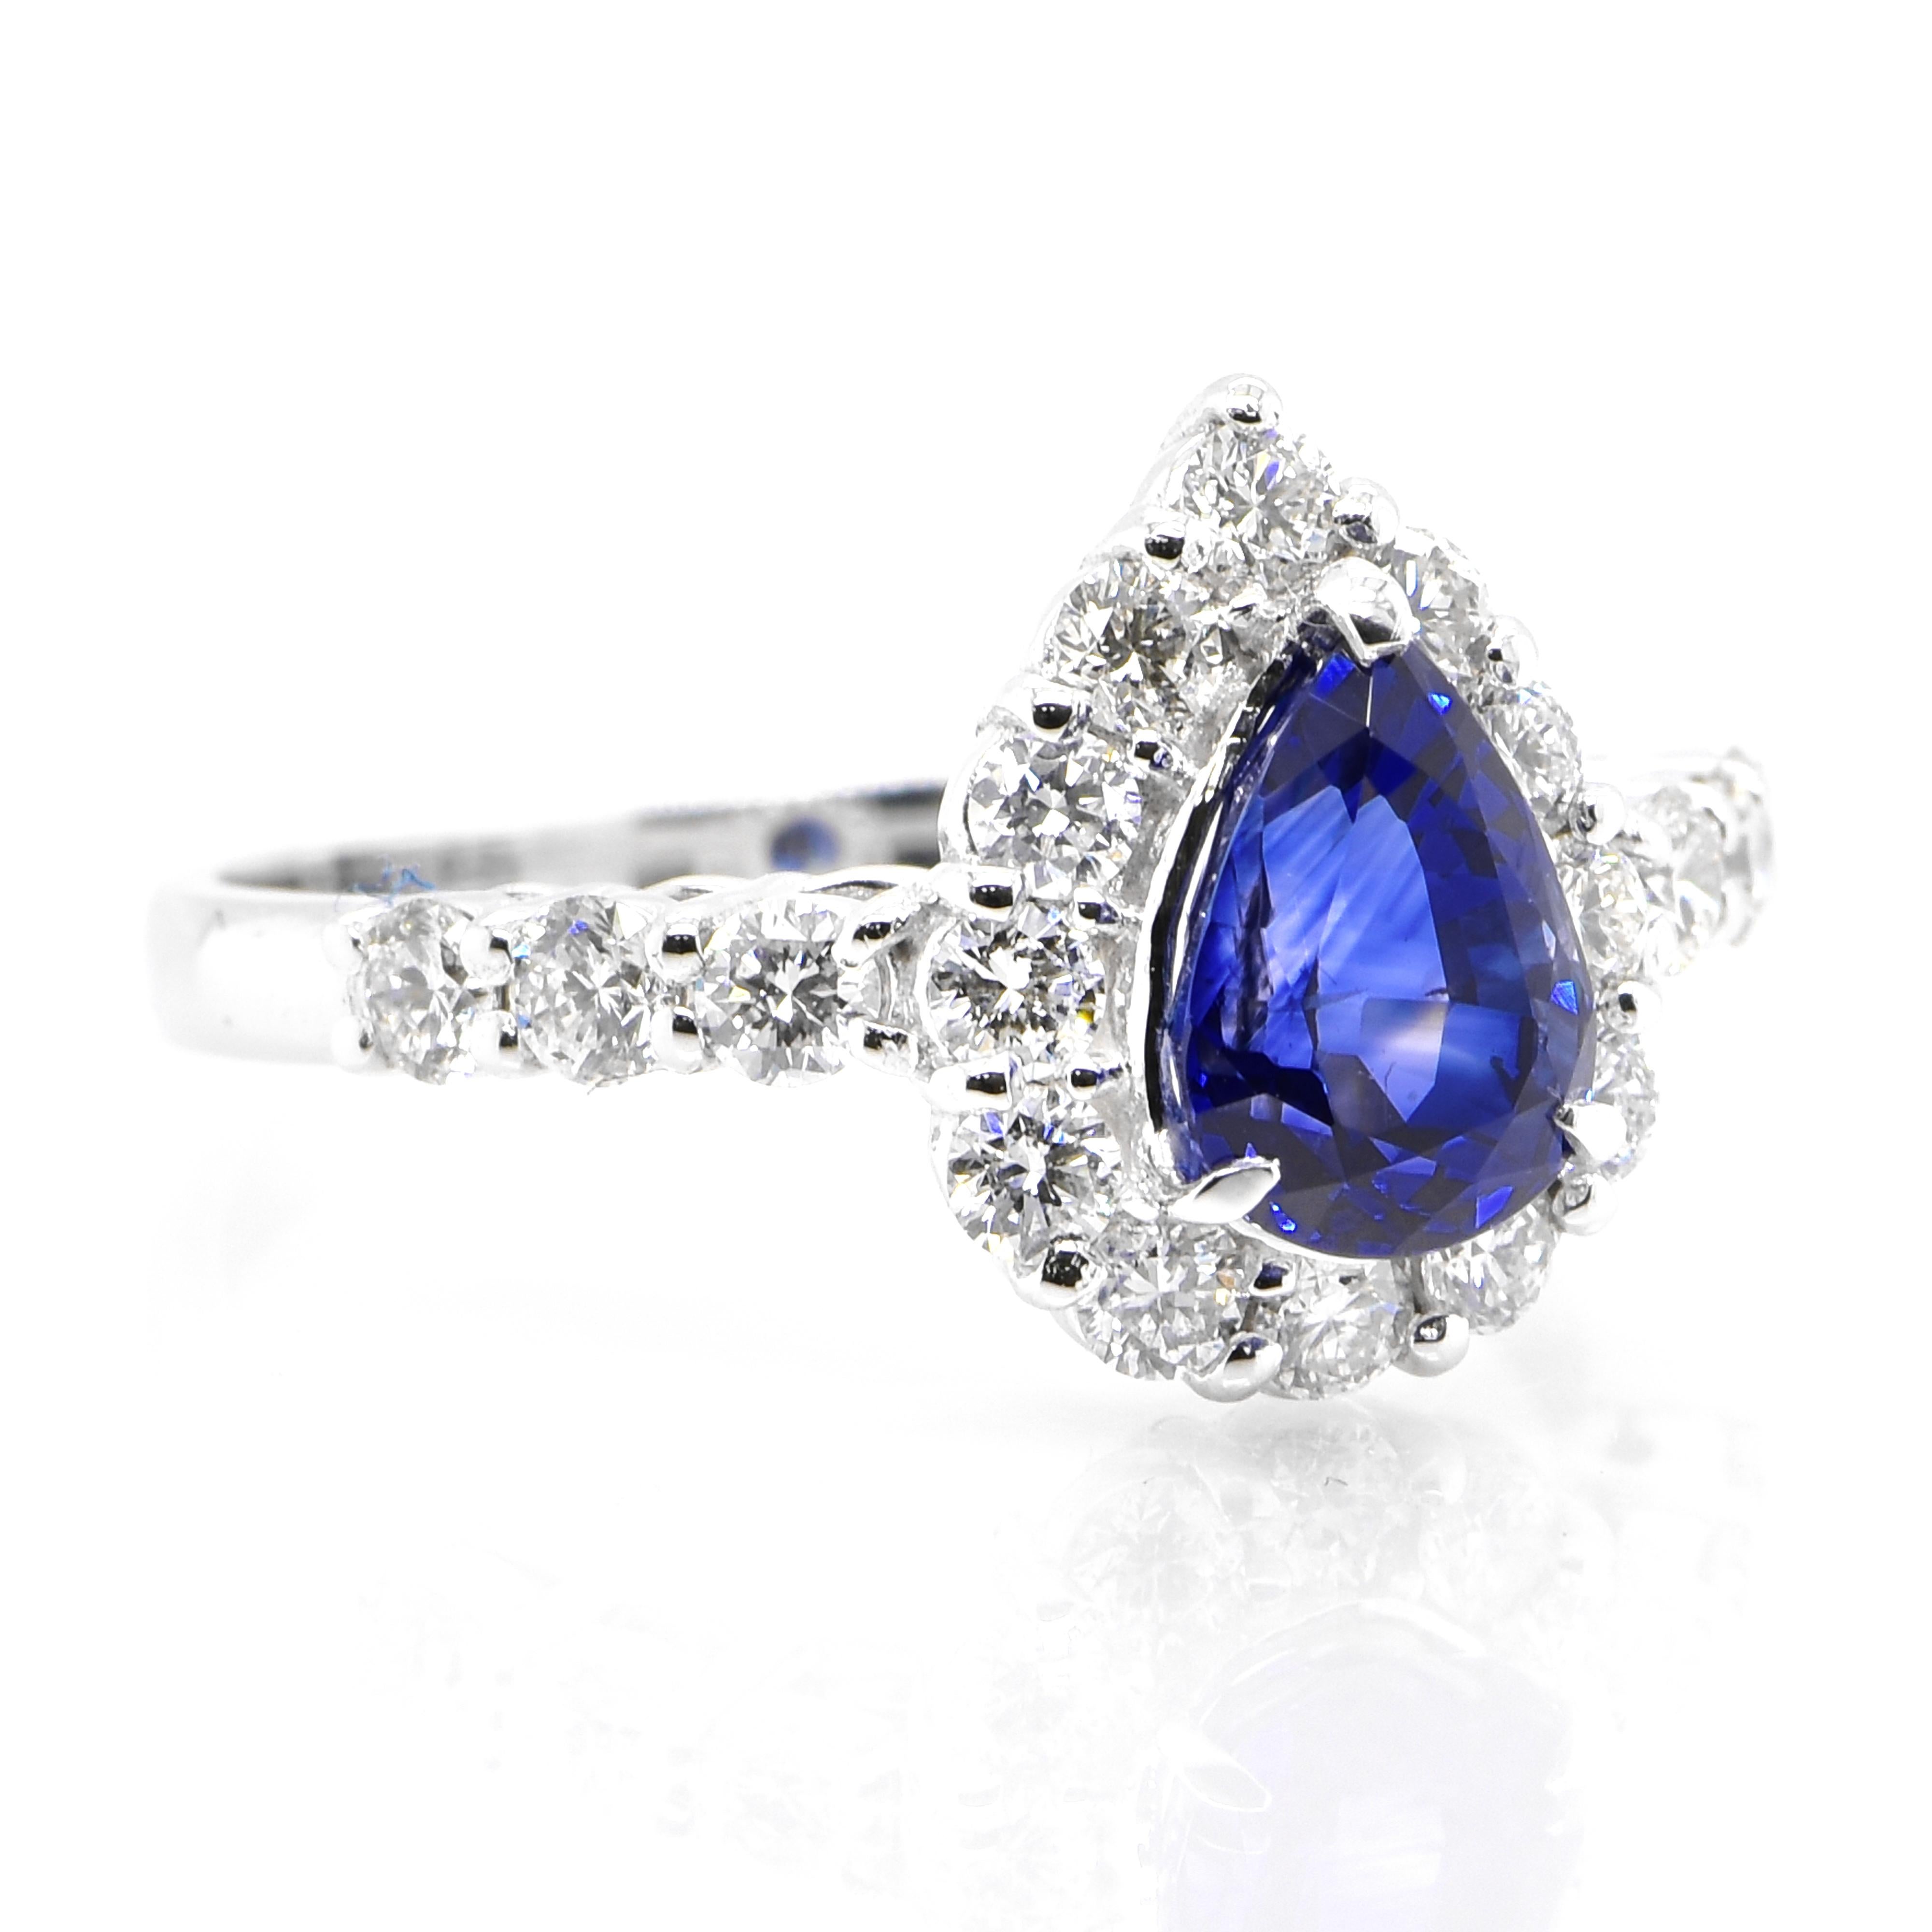 Modern 1.50 Carat Natural Royal Blue Color Sapphire and Diamond Ring Made in Platinum For Sale